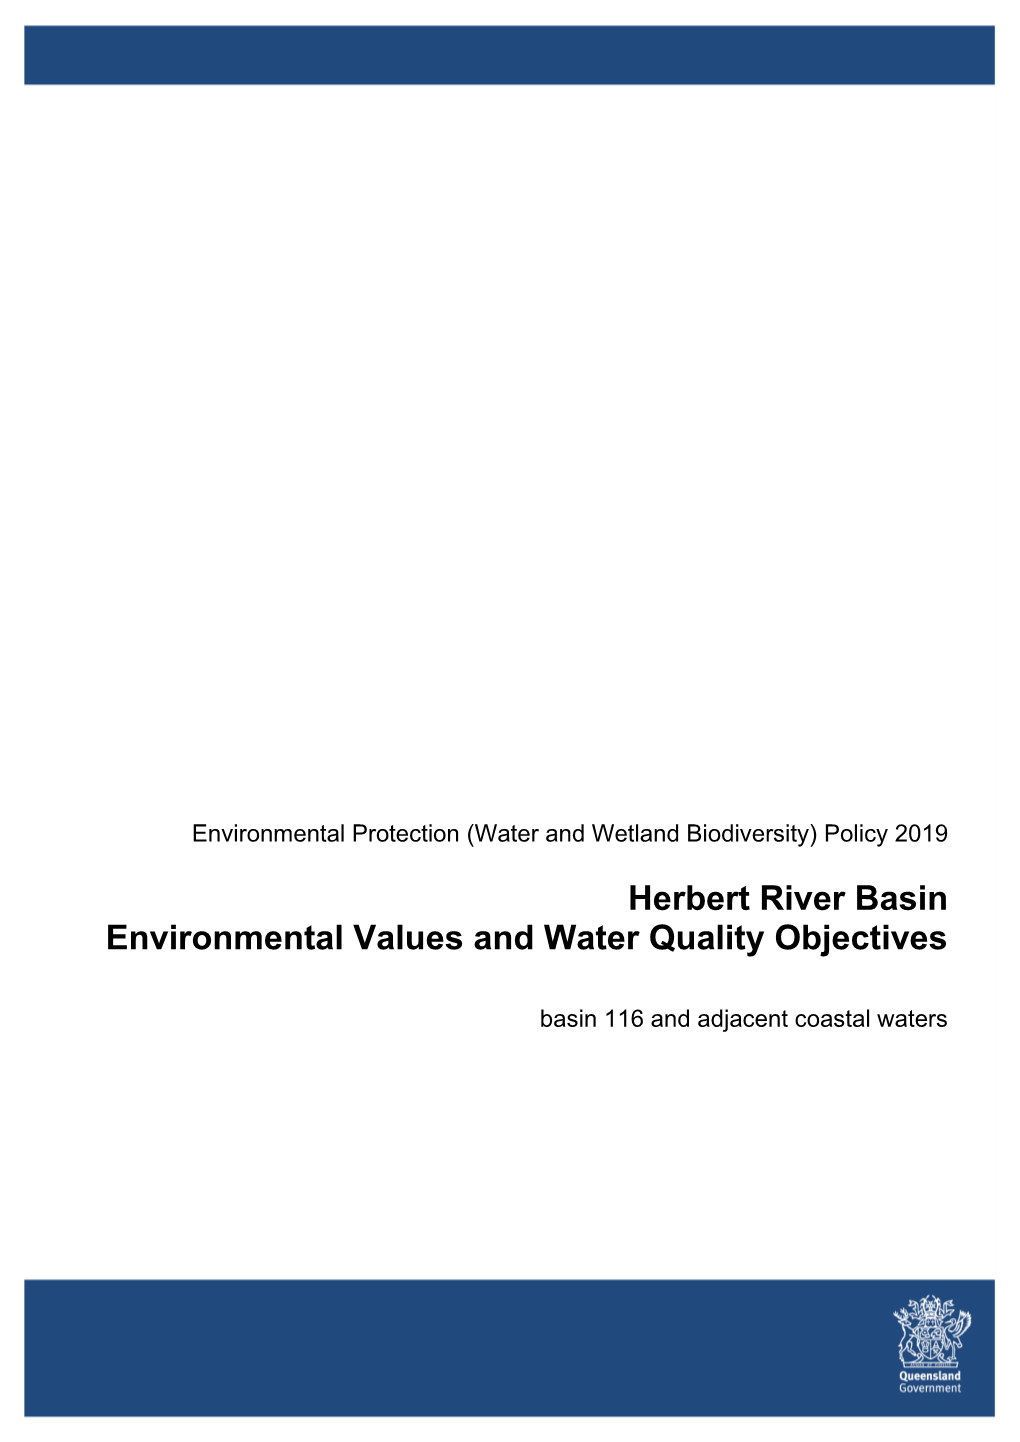 Herbert River Basin Environmental Values and Water Quality Objectives